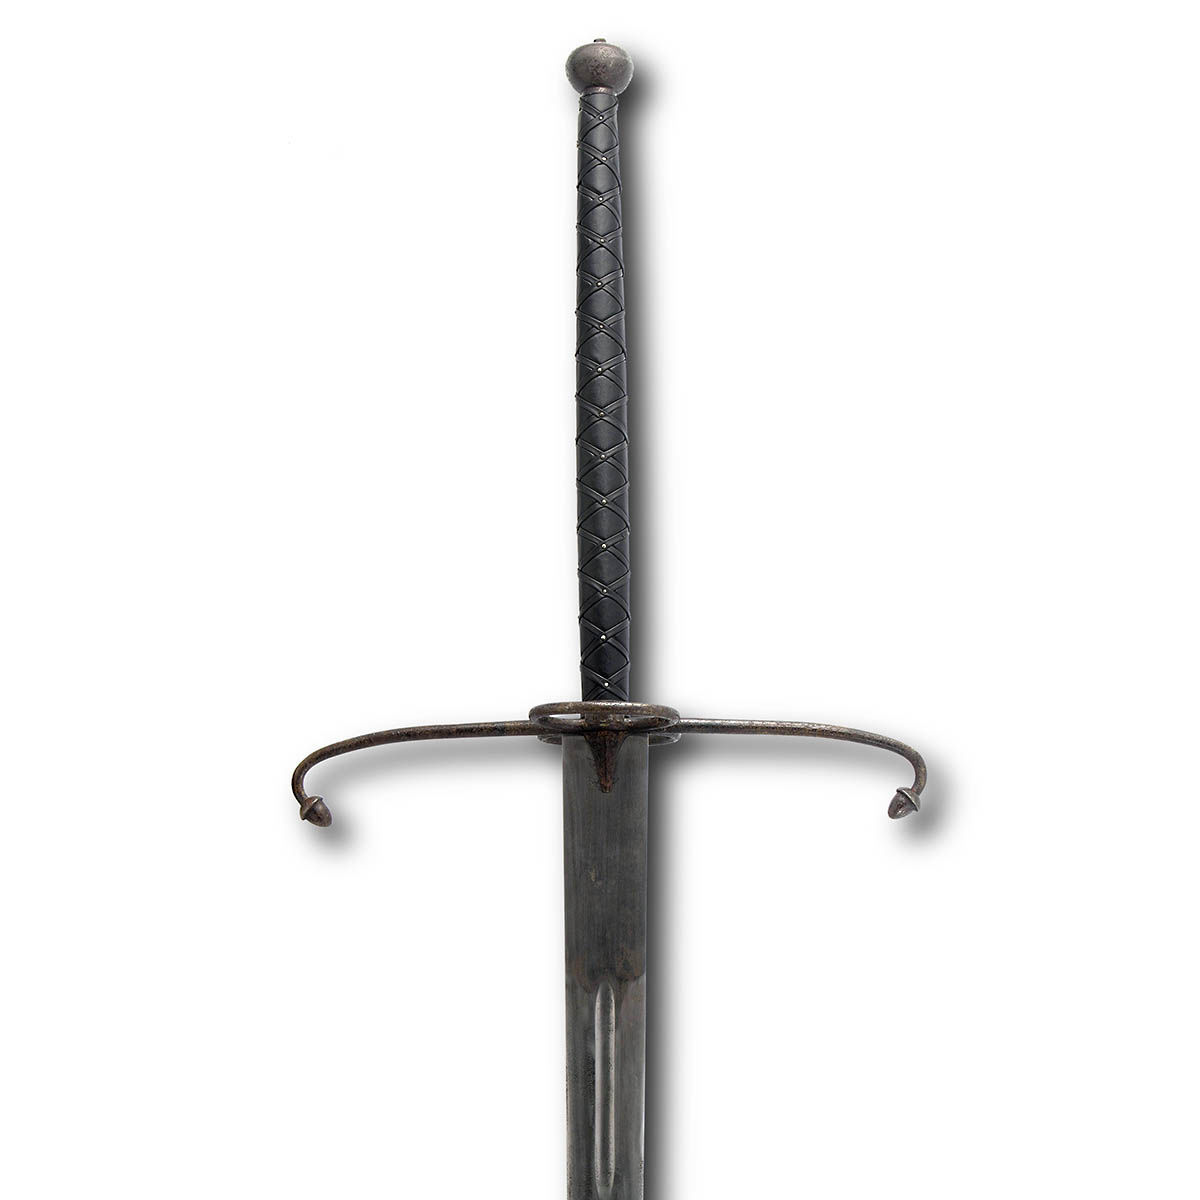 Lowlander Sword with Antiqued Finish by Paul Chen / Hanwei